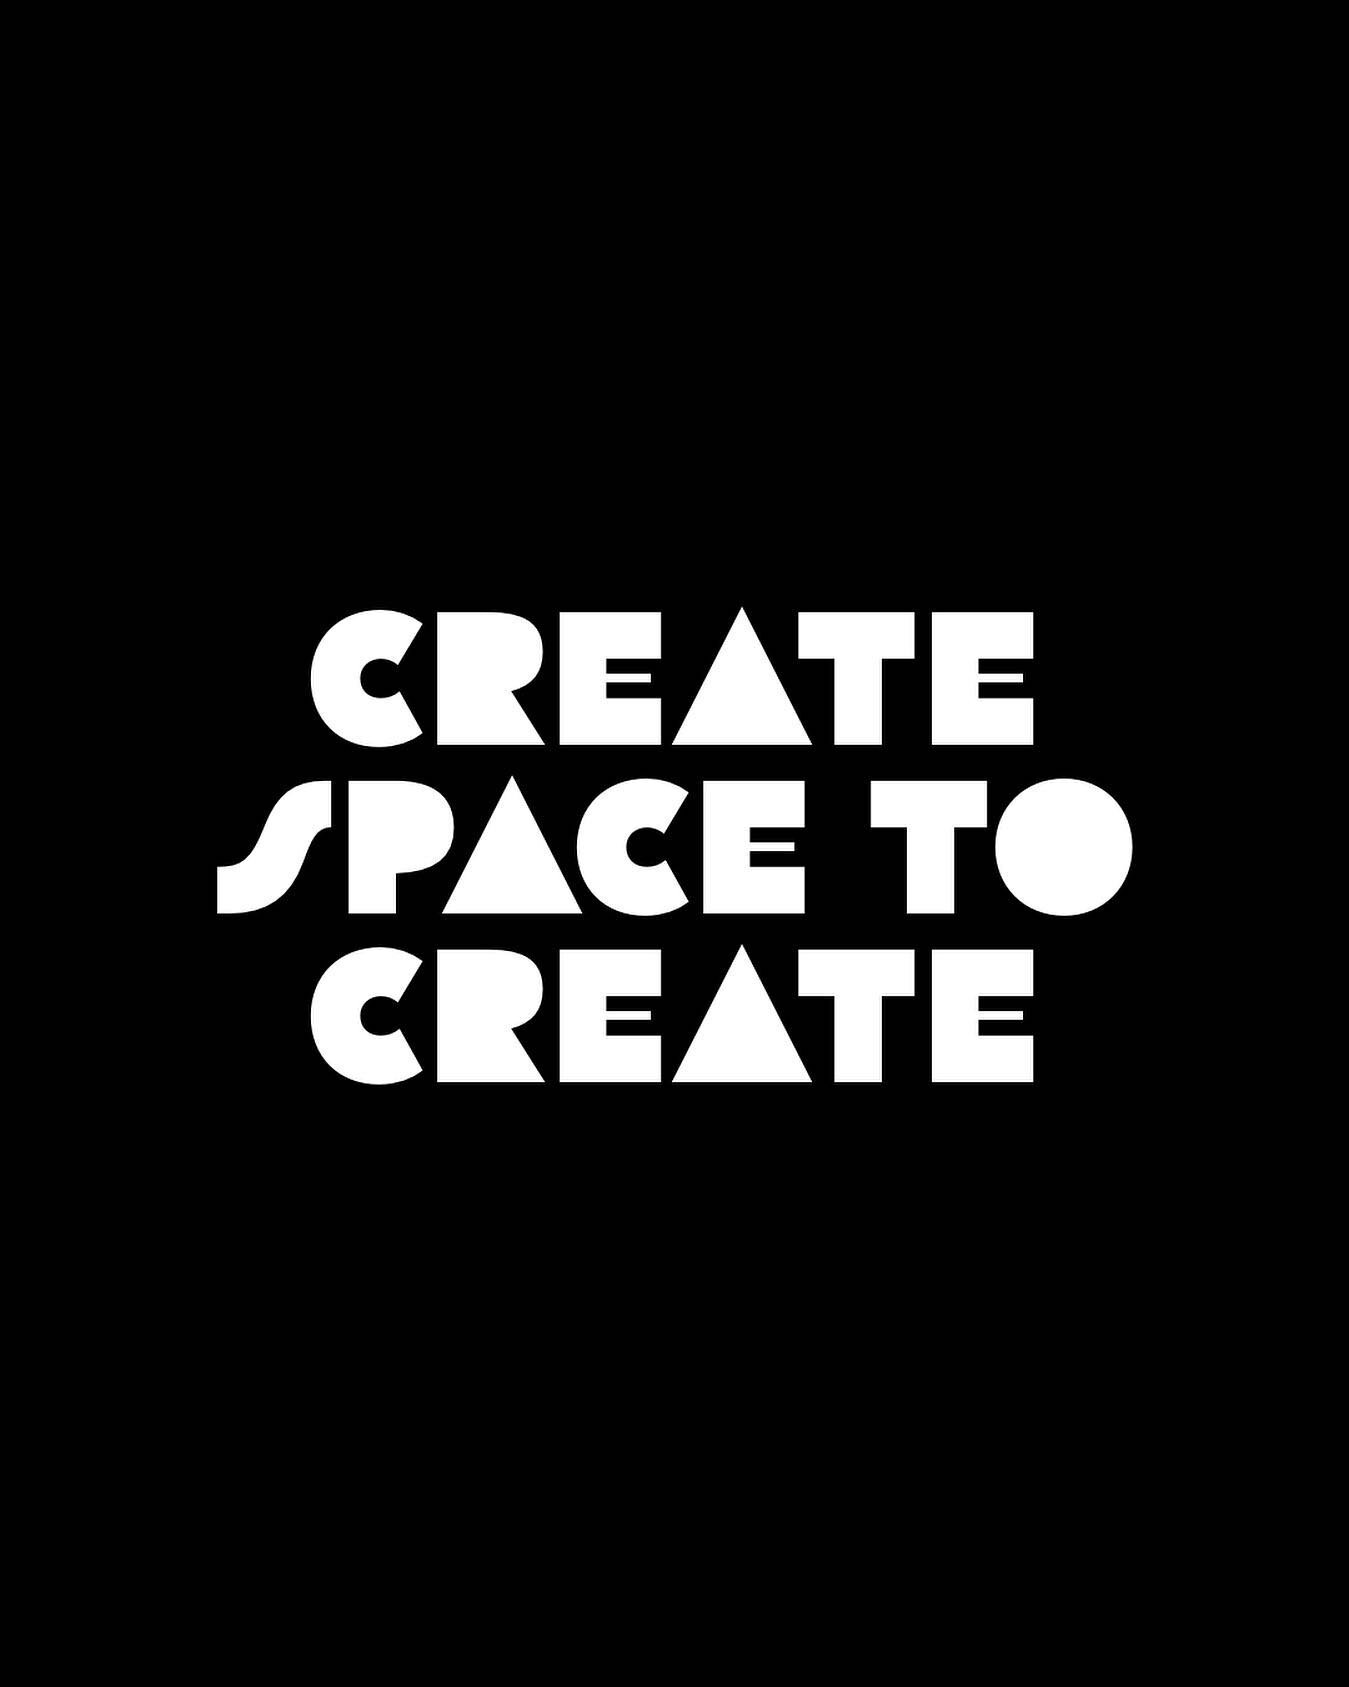 Create Space to Create - the time, the headspace, the physical space, the heartspace, the open space - to create.

I just launched my new services, art, and website. If you want to launch that idea you can&rsquo;t stop thinking about, see my website 